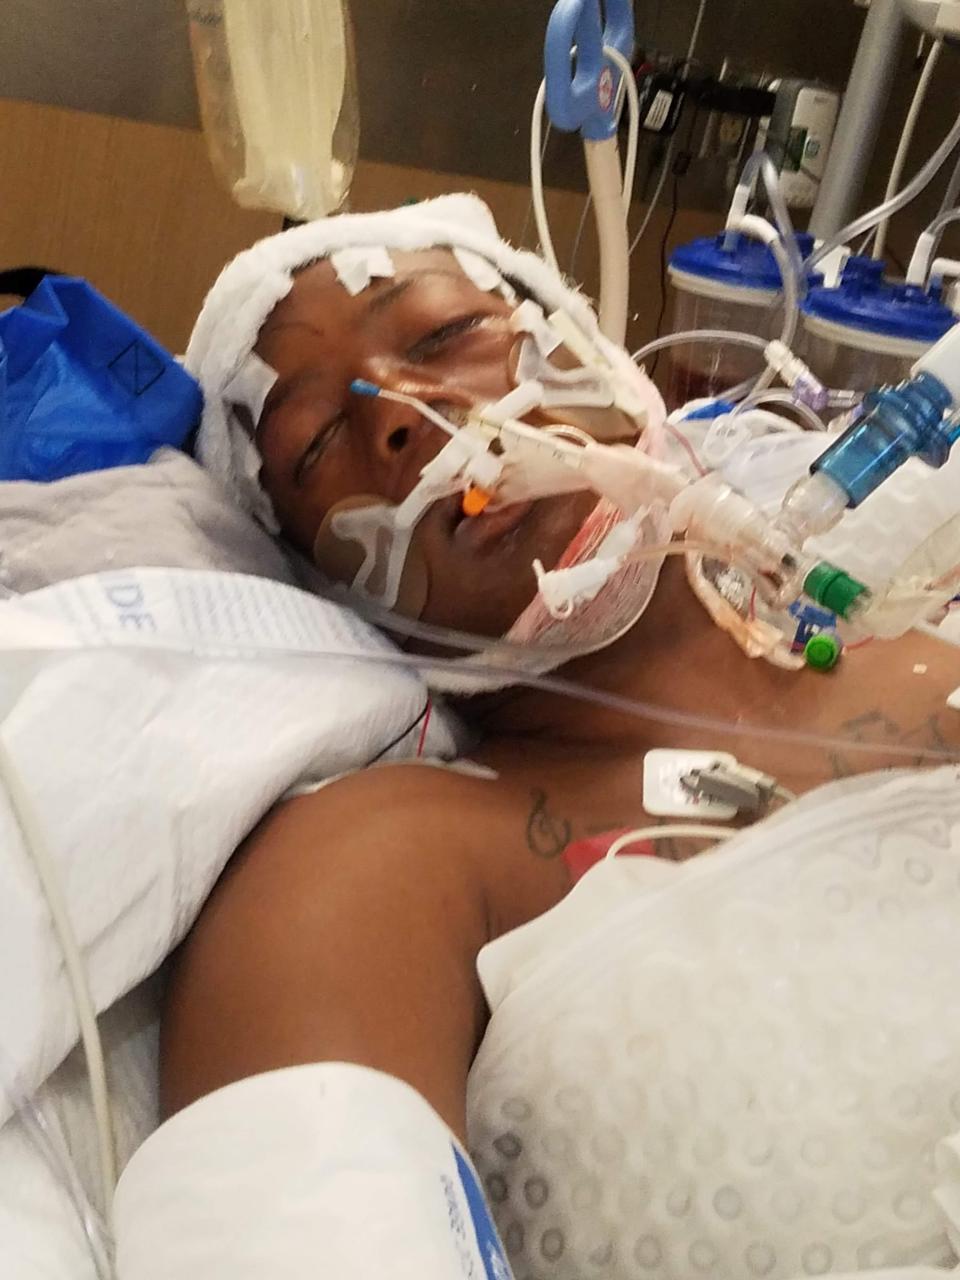 Elijah McClain is shown in a hospital bed before he died in 2019 following a violent encounter with police in Aurora, Colorado.